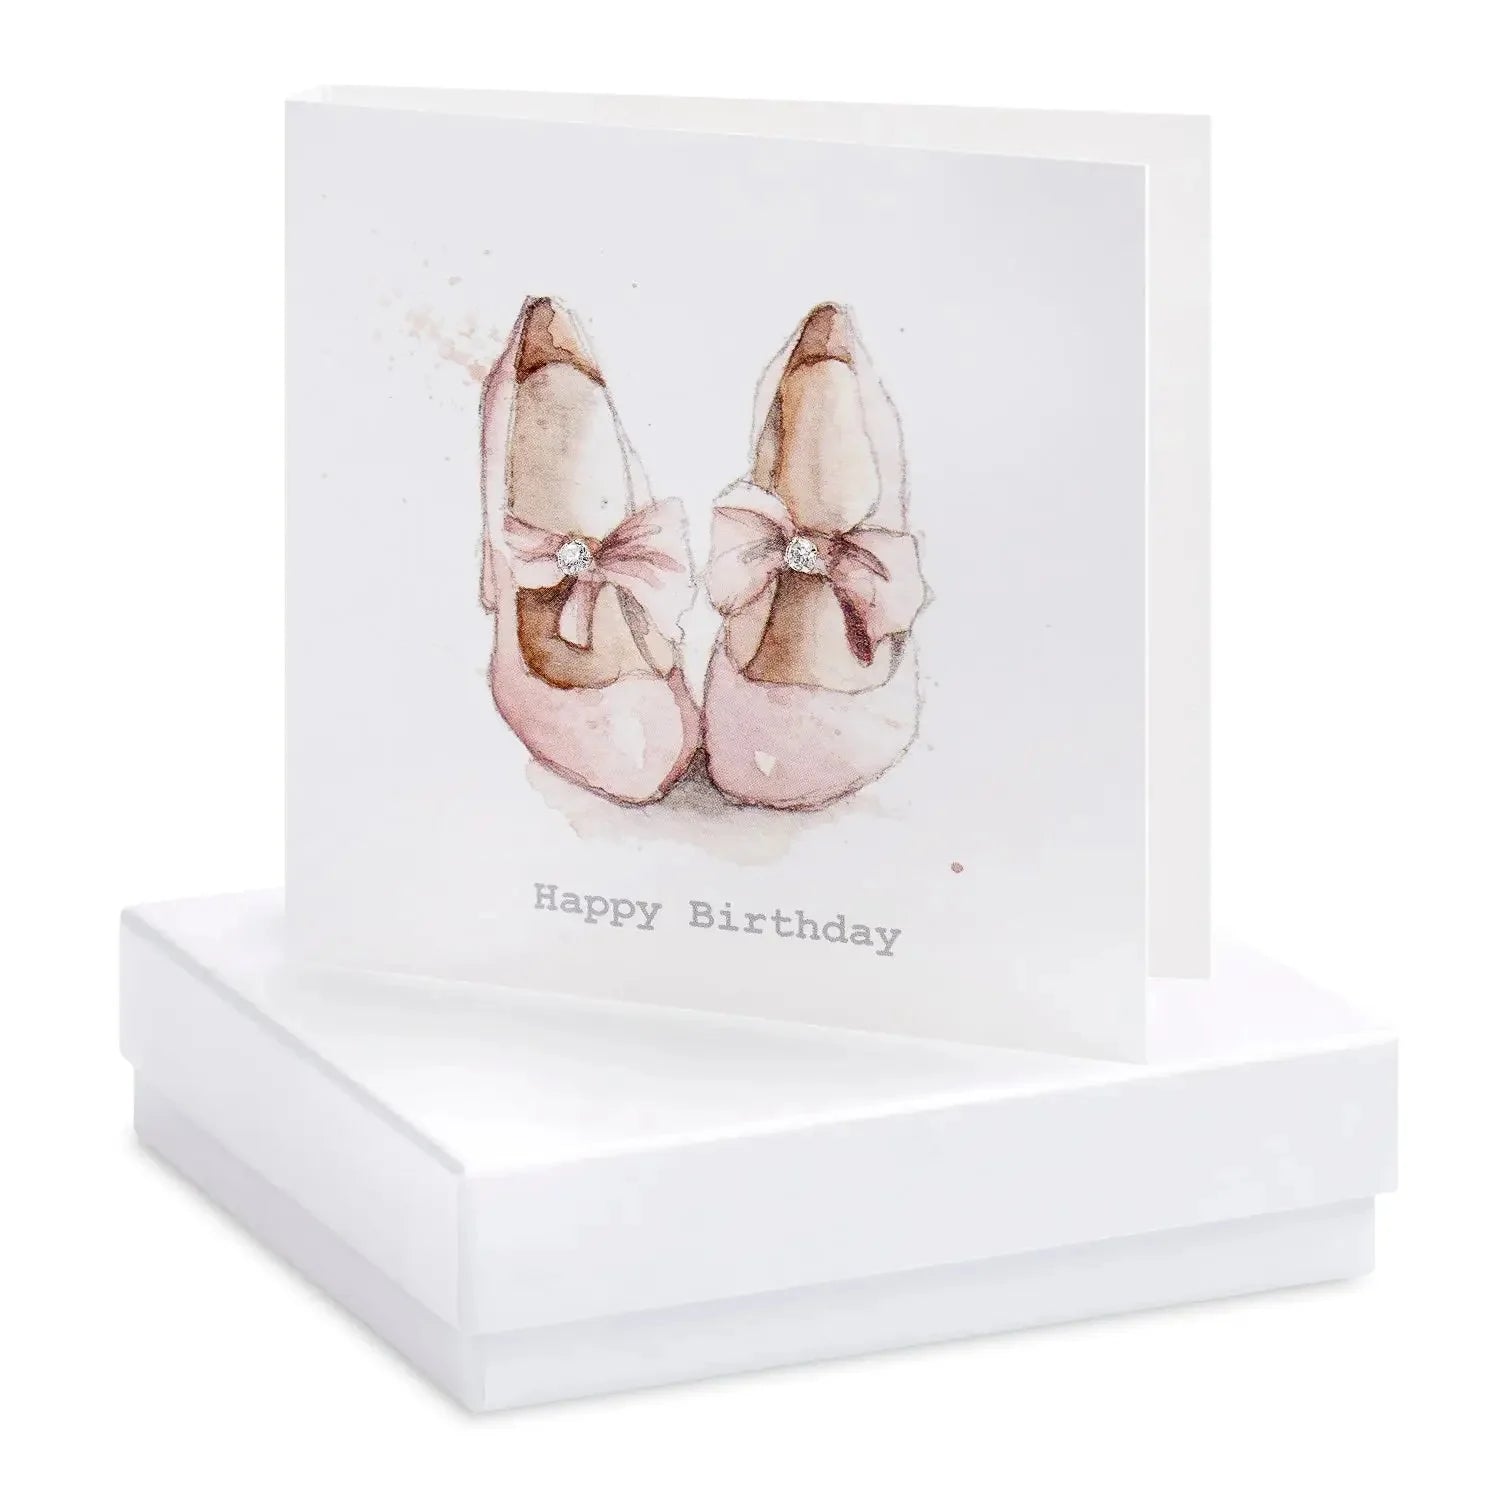 Fabulous Gifts Crumble & Core Box Birthday Party Shoes Earring Card by Weirs of Baggot Street